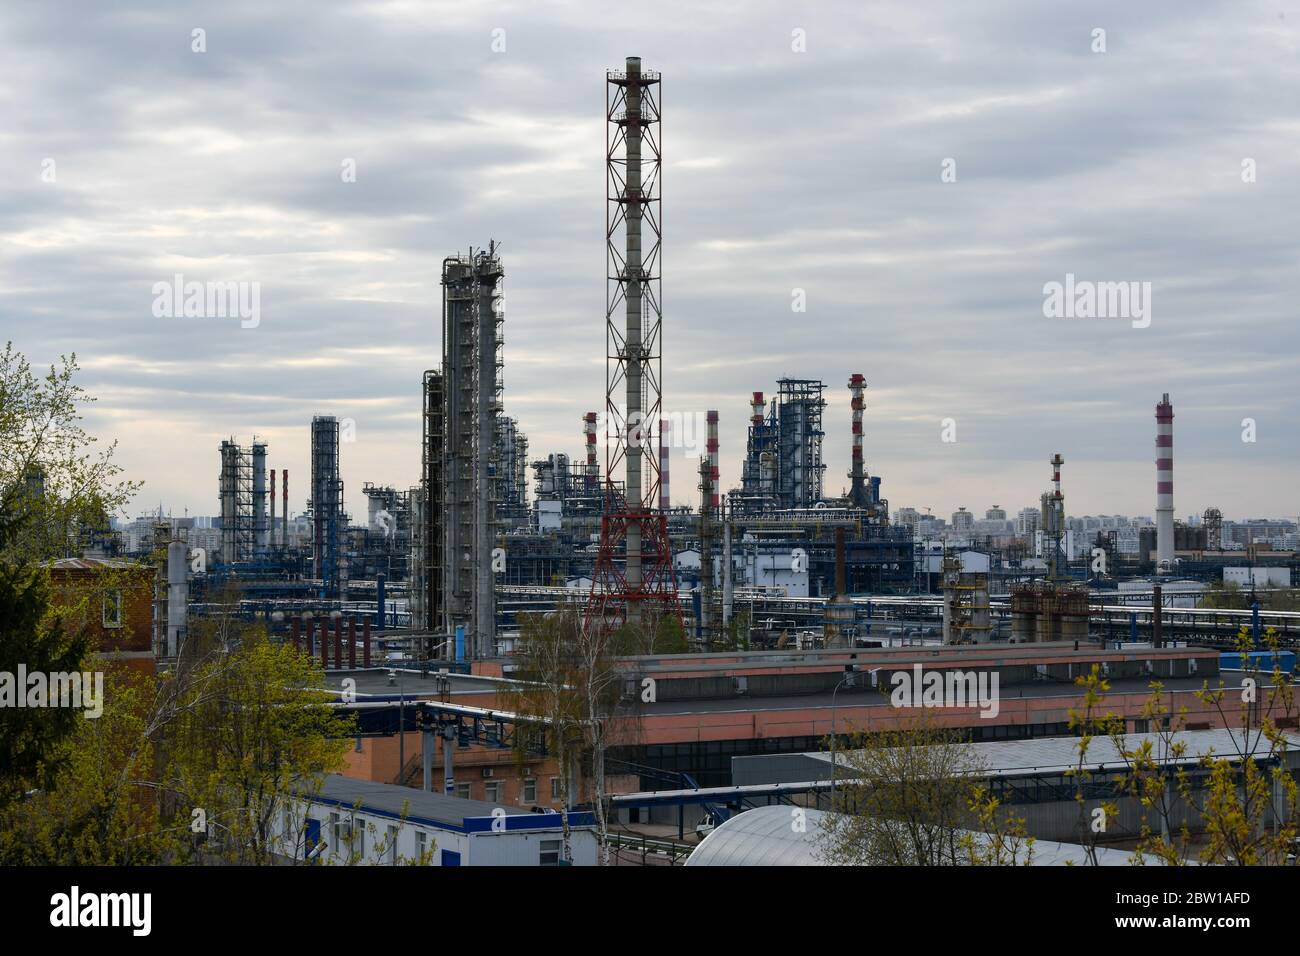 Moscow, Russia. 2nd May, 2020. View of the Moscow Oil Refinery in the Chagino-Kapotnya industrial zone in Moscow, Russia. Stock Photo